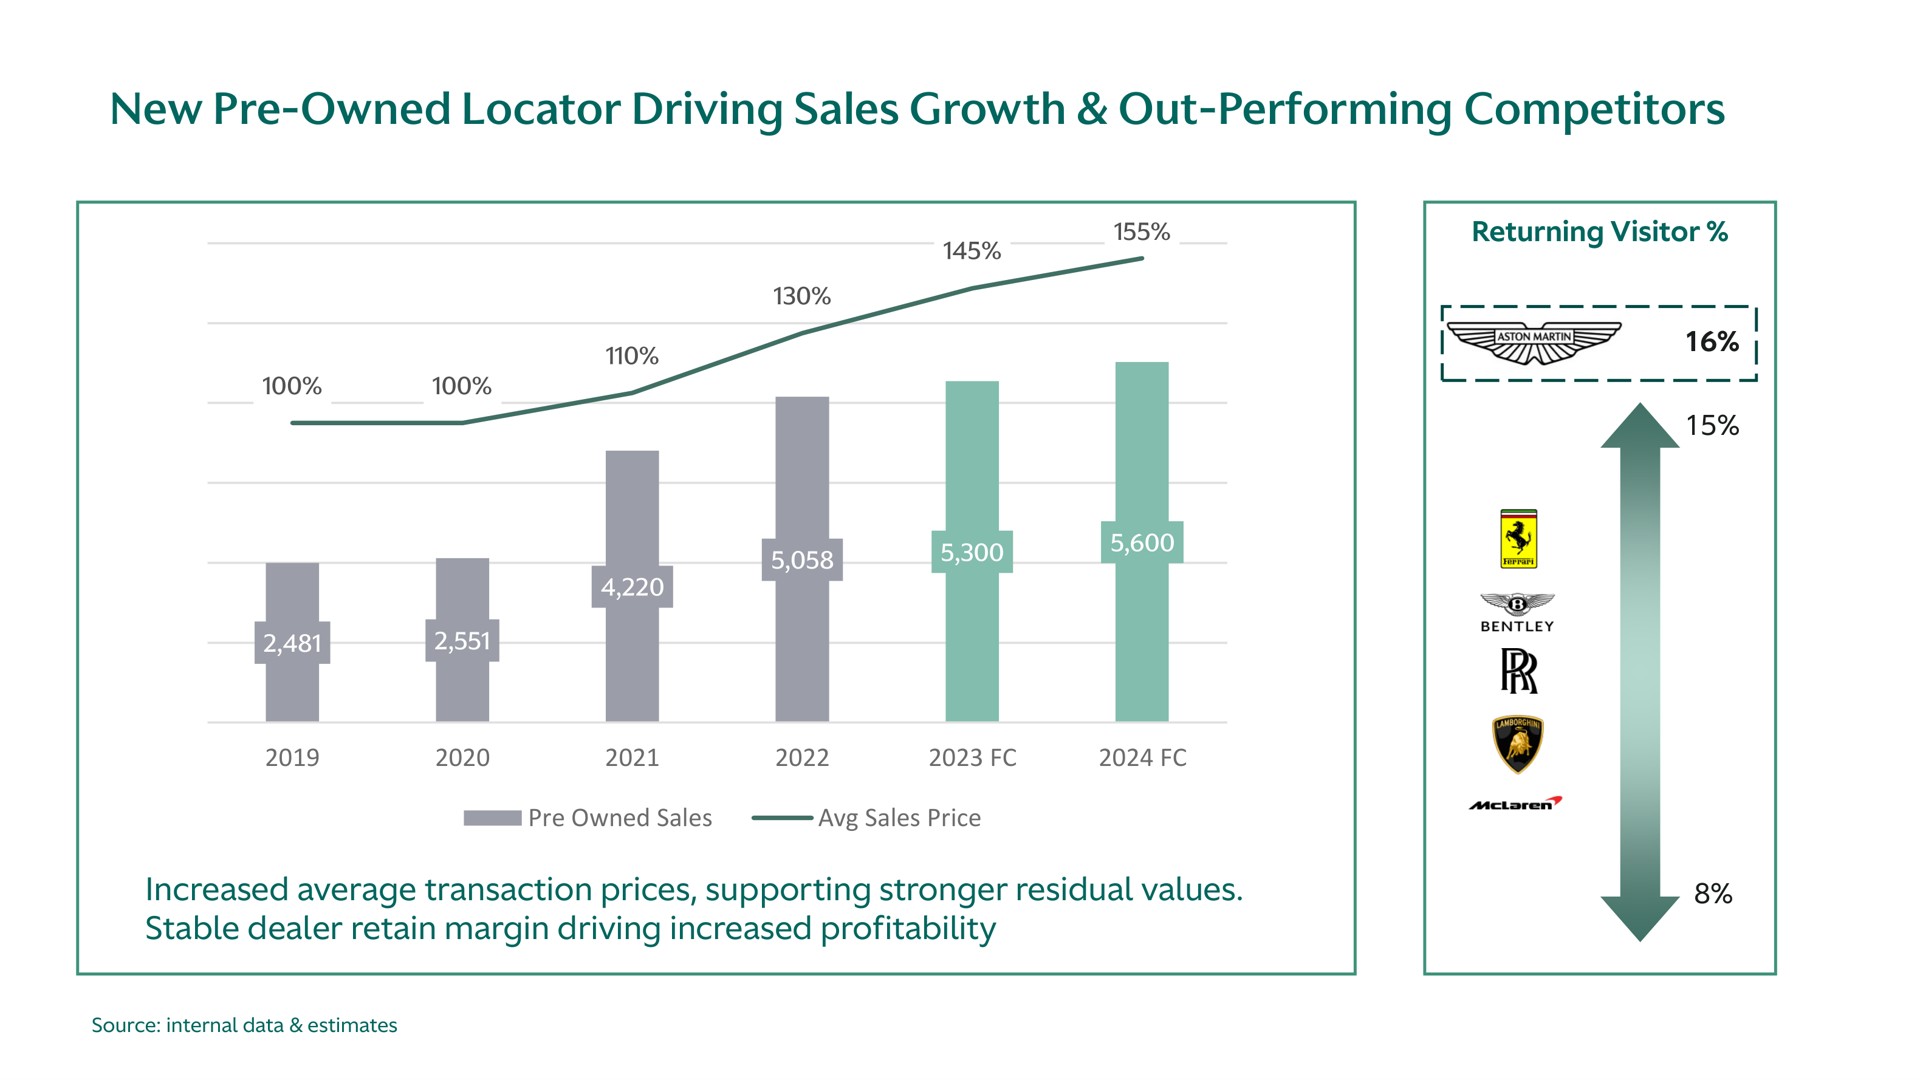 new owned locator driving sales growth out performing competitors increased average transaction prices supporting residual values stable dealer retain margin driving increased profitability | Aston Martin Lagonda